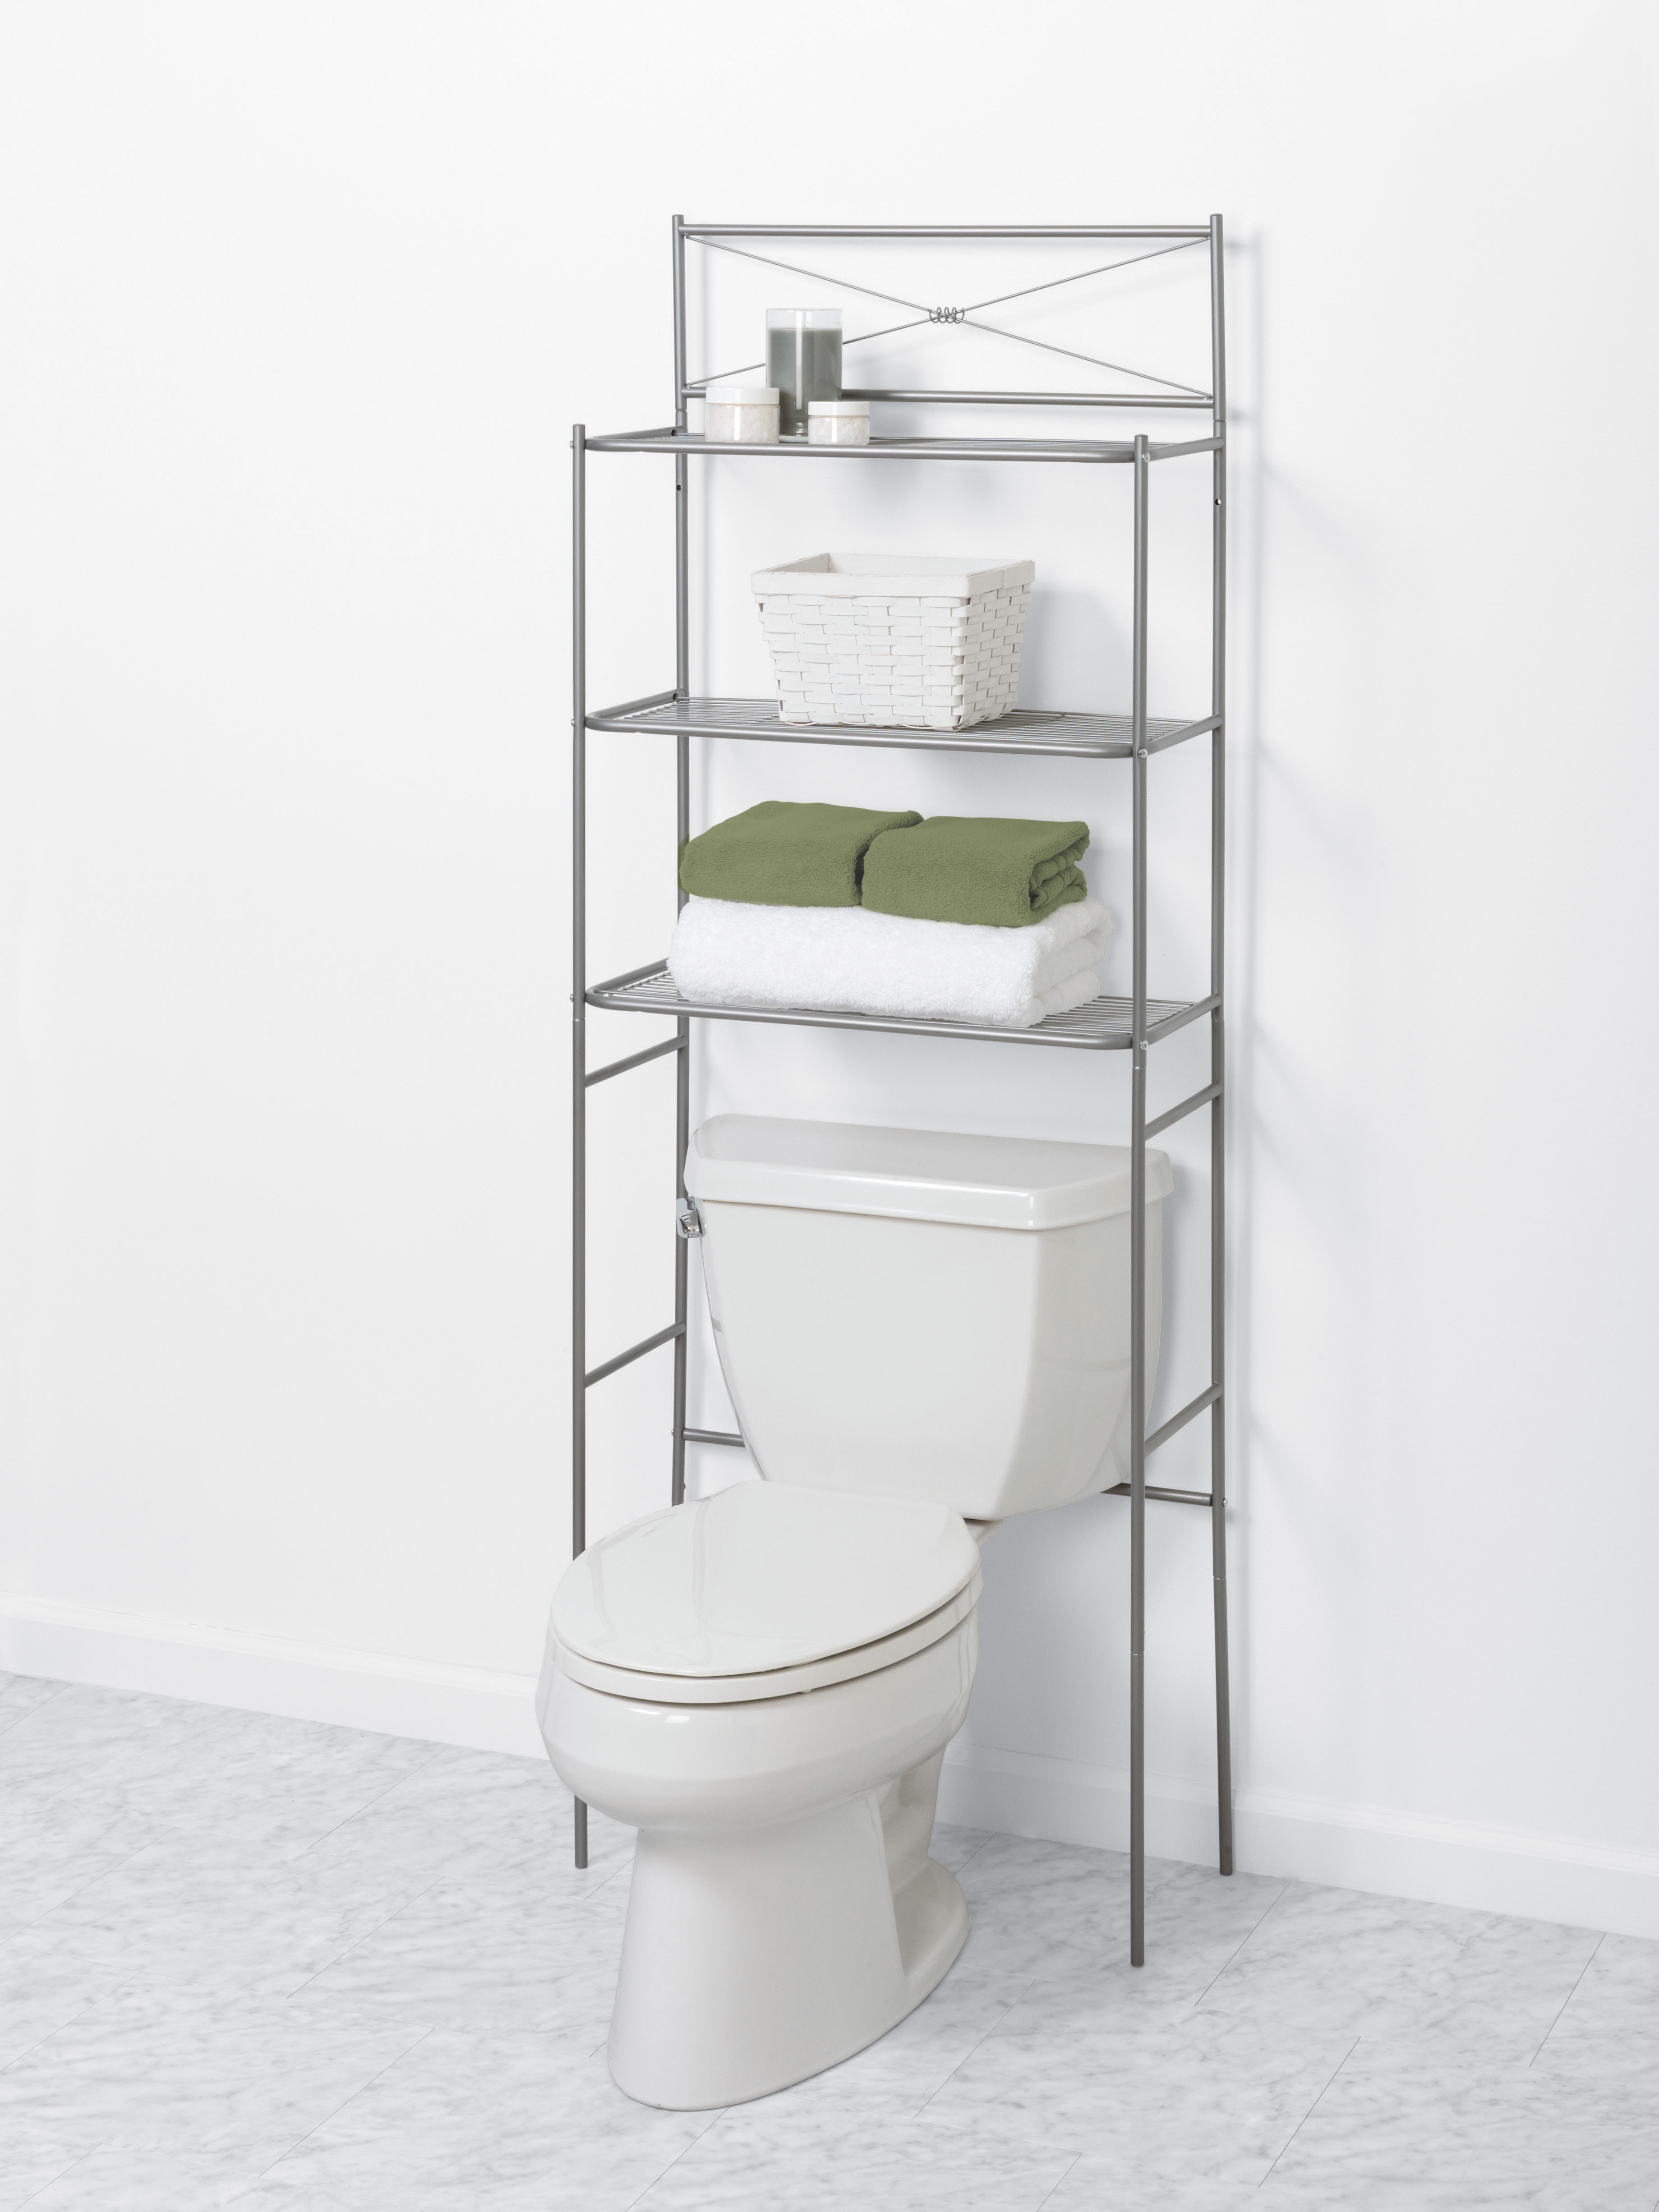 Satin Nickel Bathroom Spacesaver with 3 Shelves, Zenna Home Cross-Style over-the-Toilet - image 1 of 6